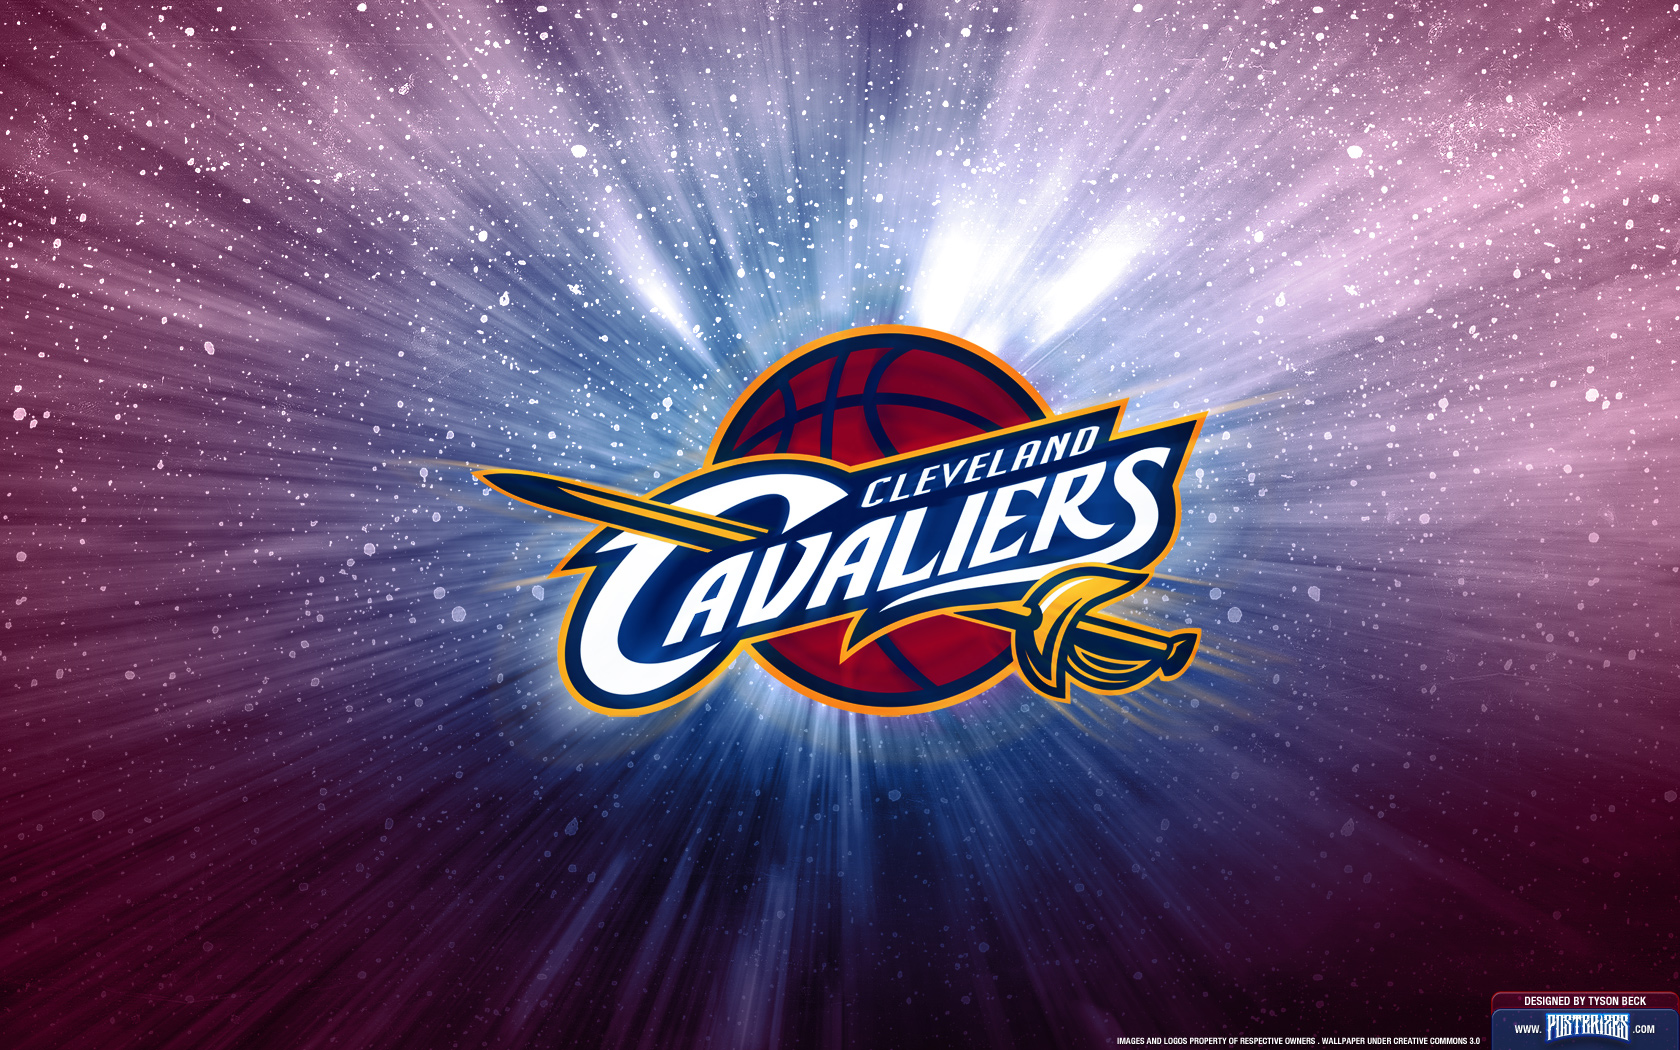 Cleveland Cavaliers Videos Image And Buzz